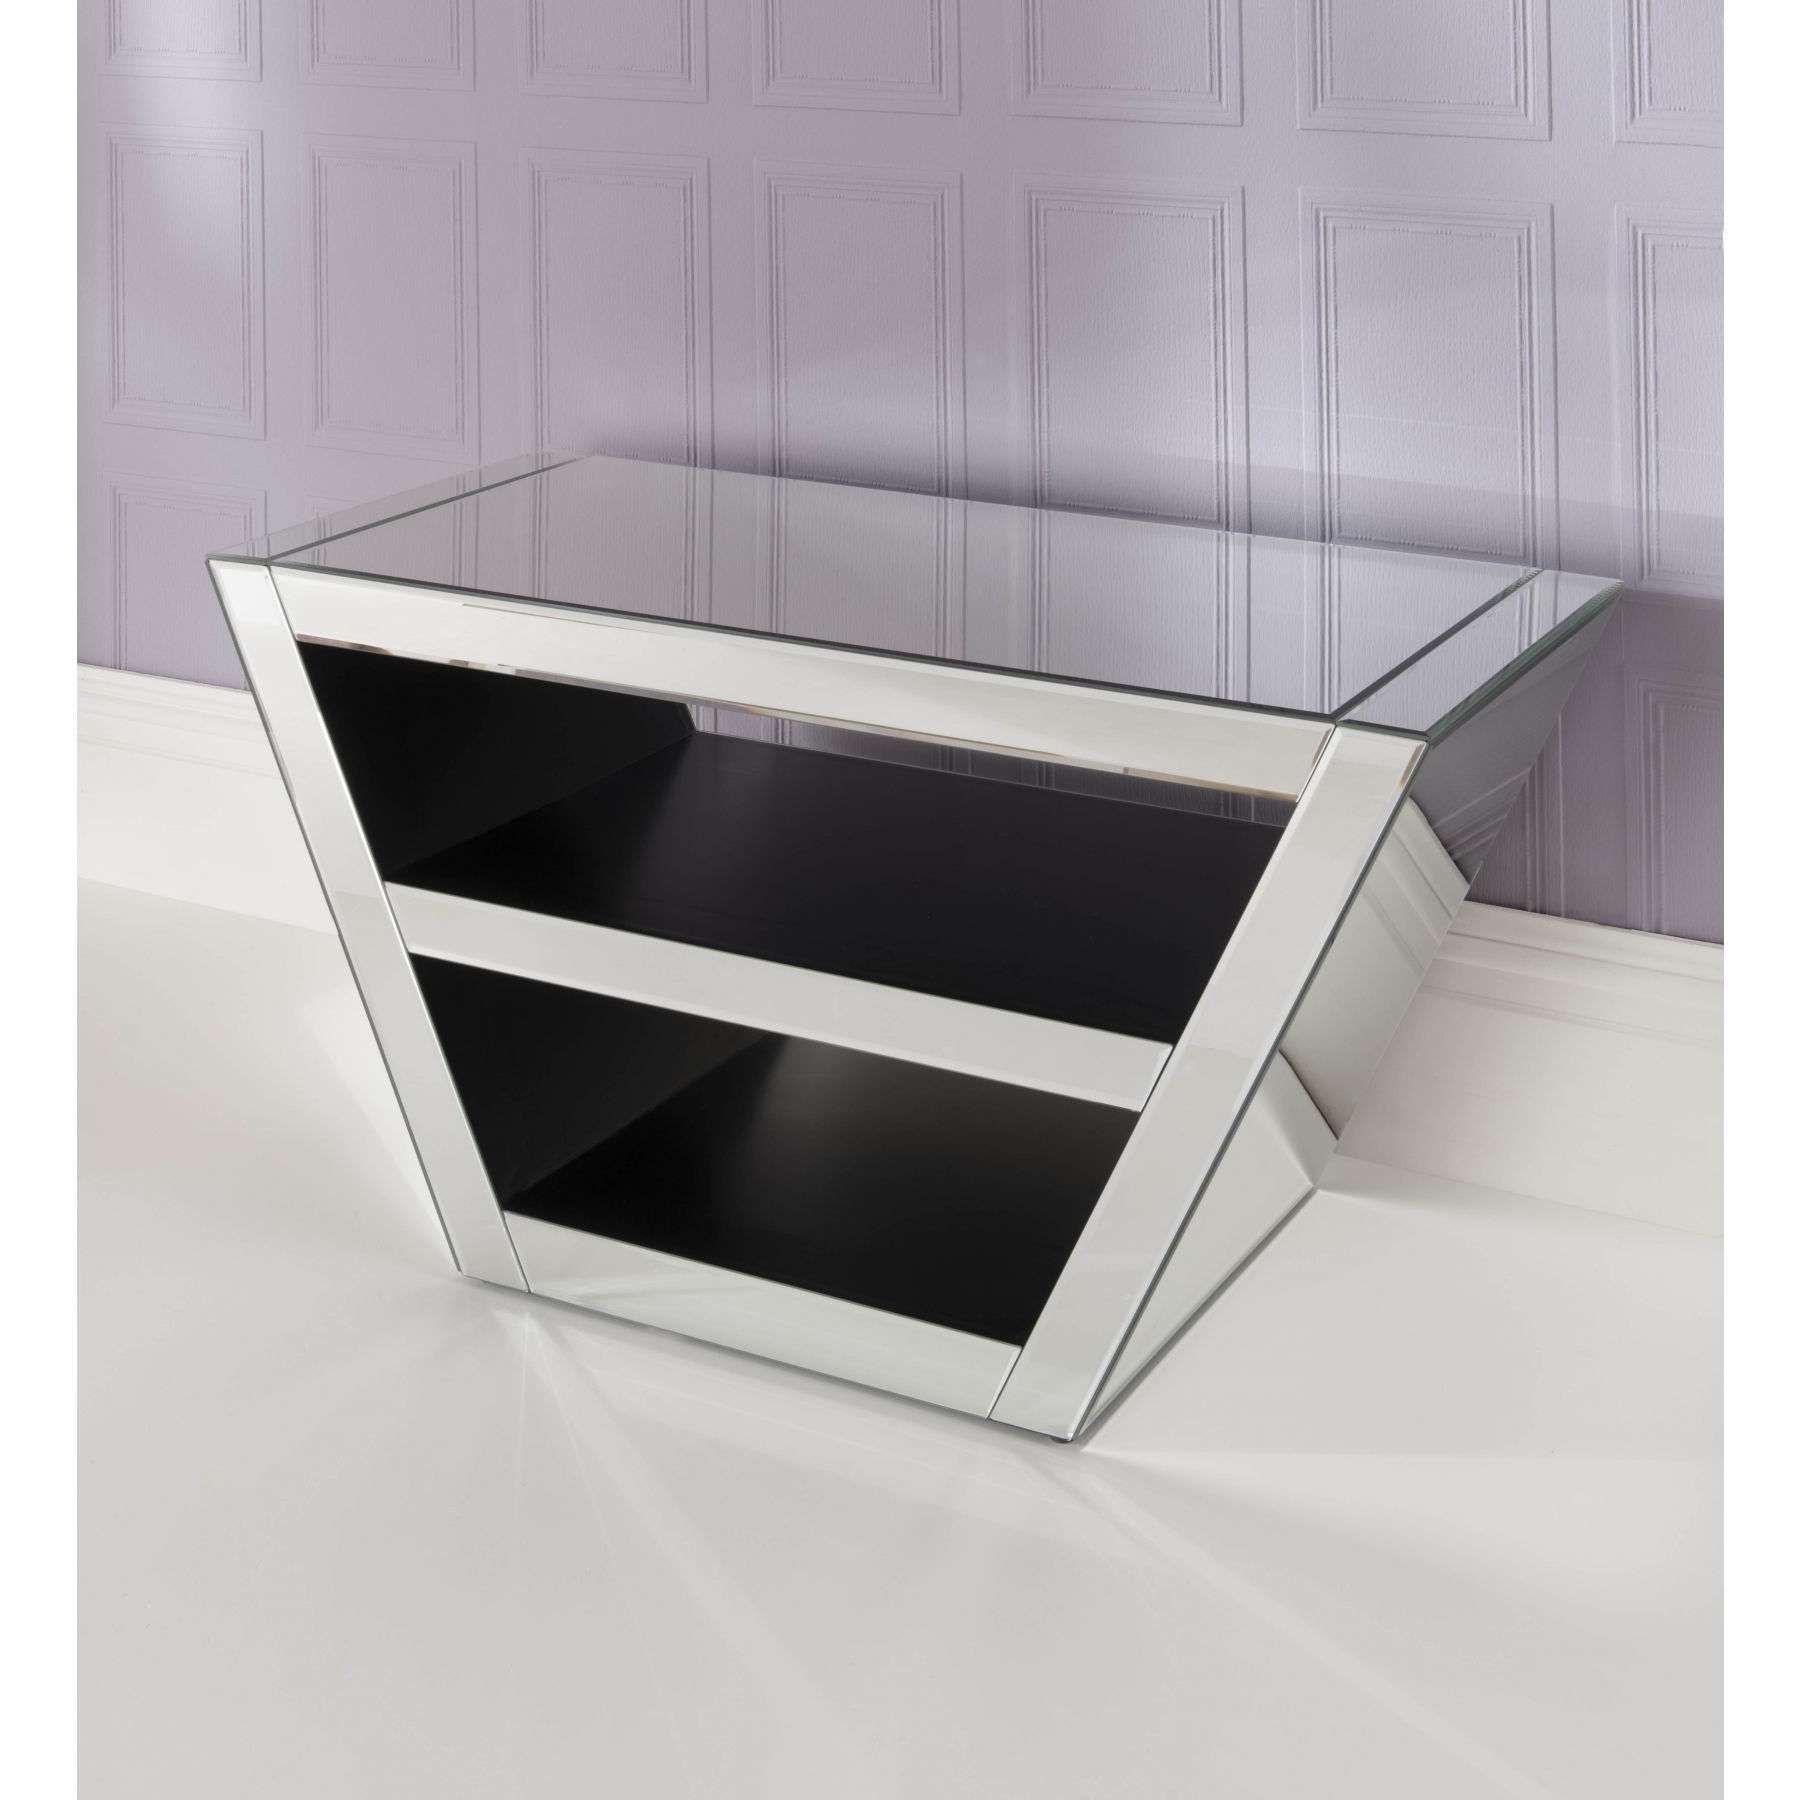 Mirrored Tv Cabinet | Venetian Glass Tv Stand | Homesdirect365 With Mirror Tv Cabinets (View 1 of 20)